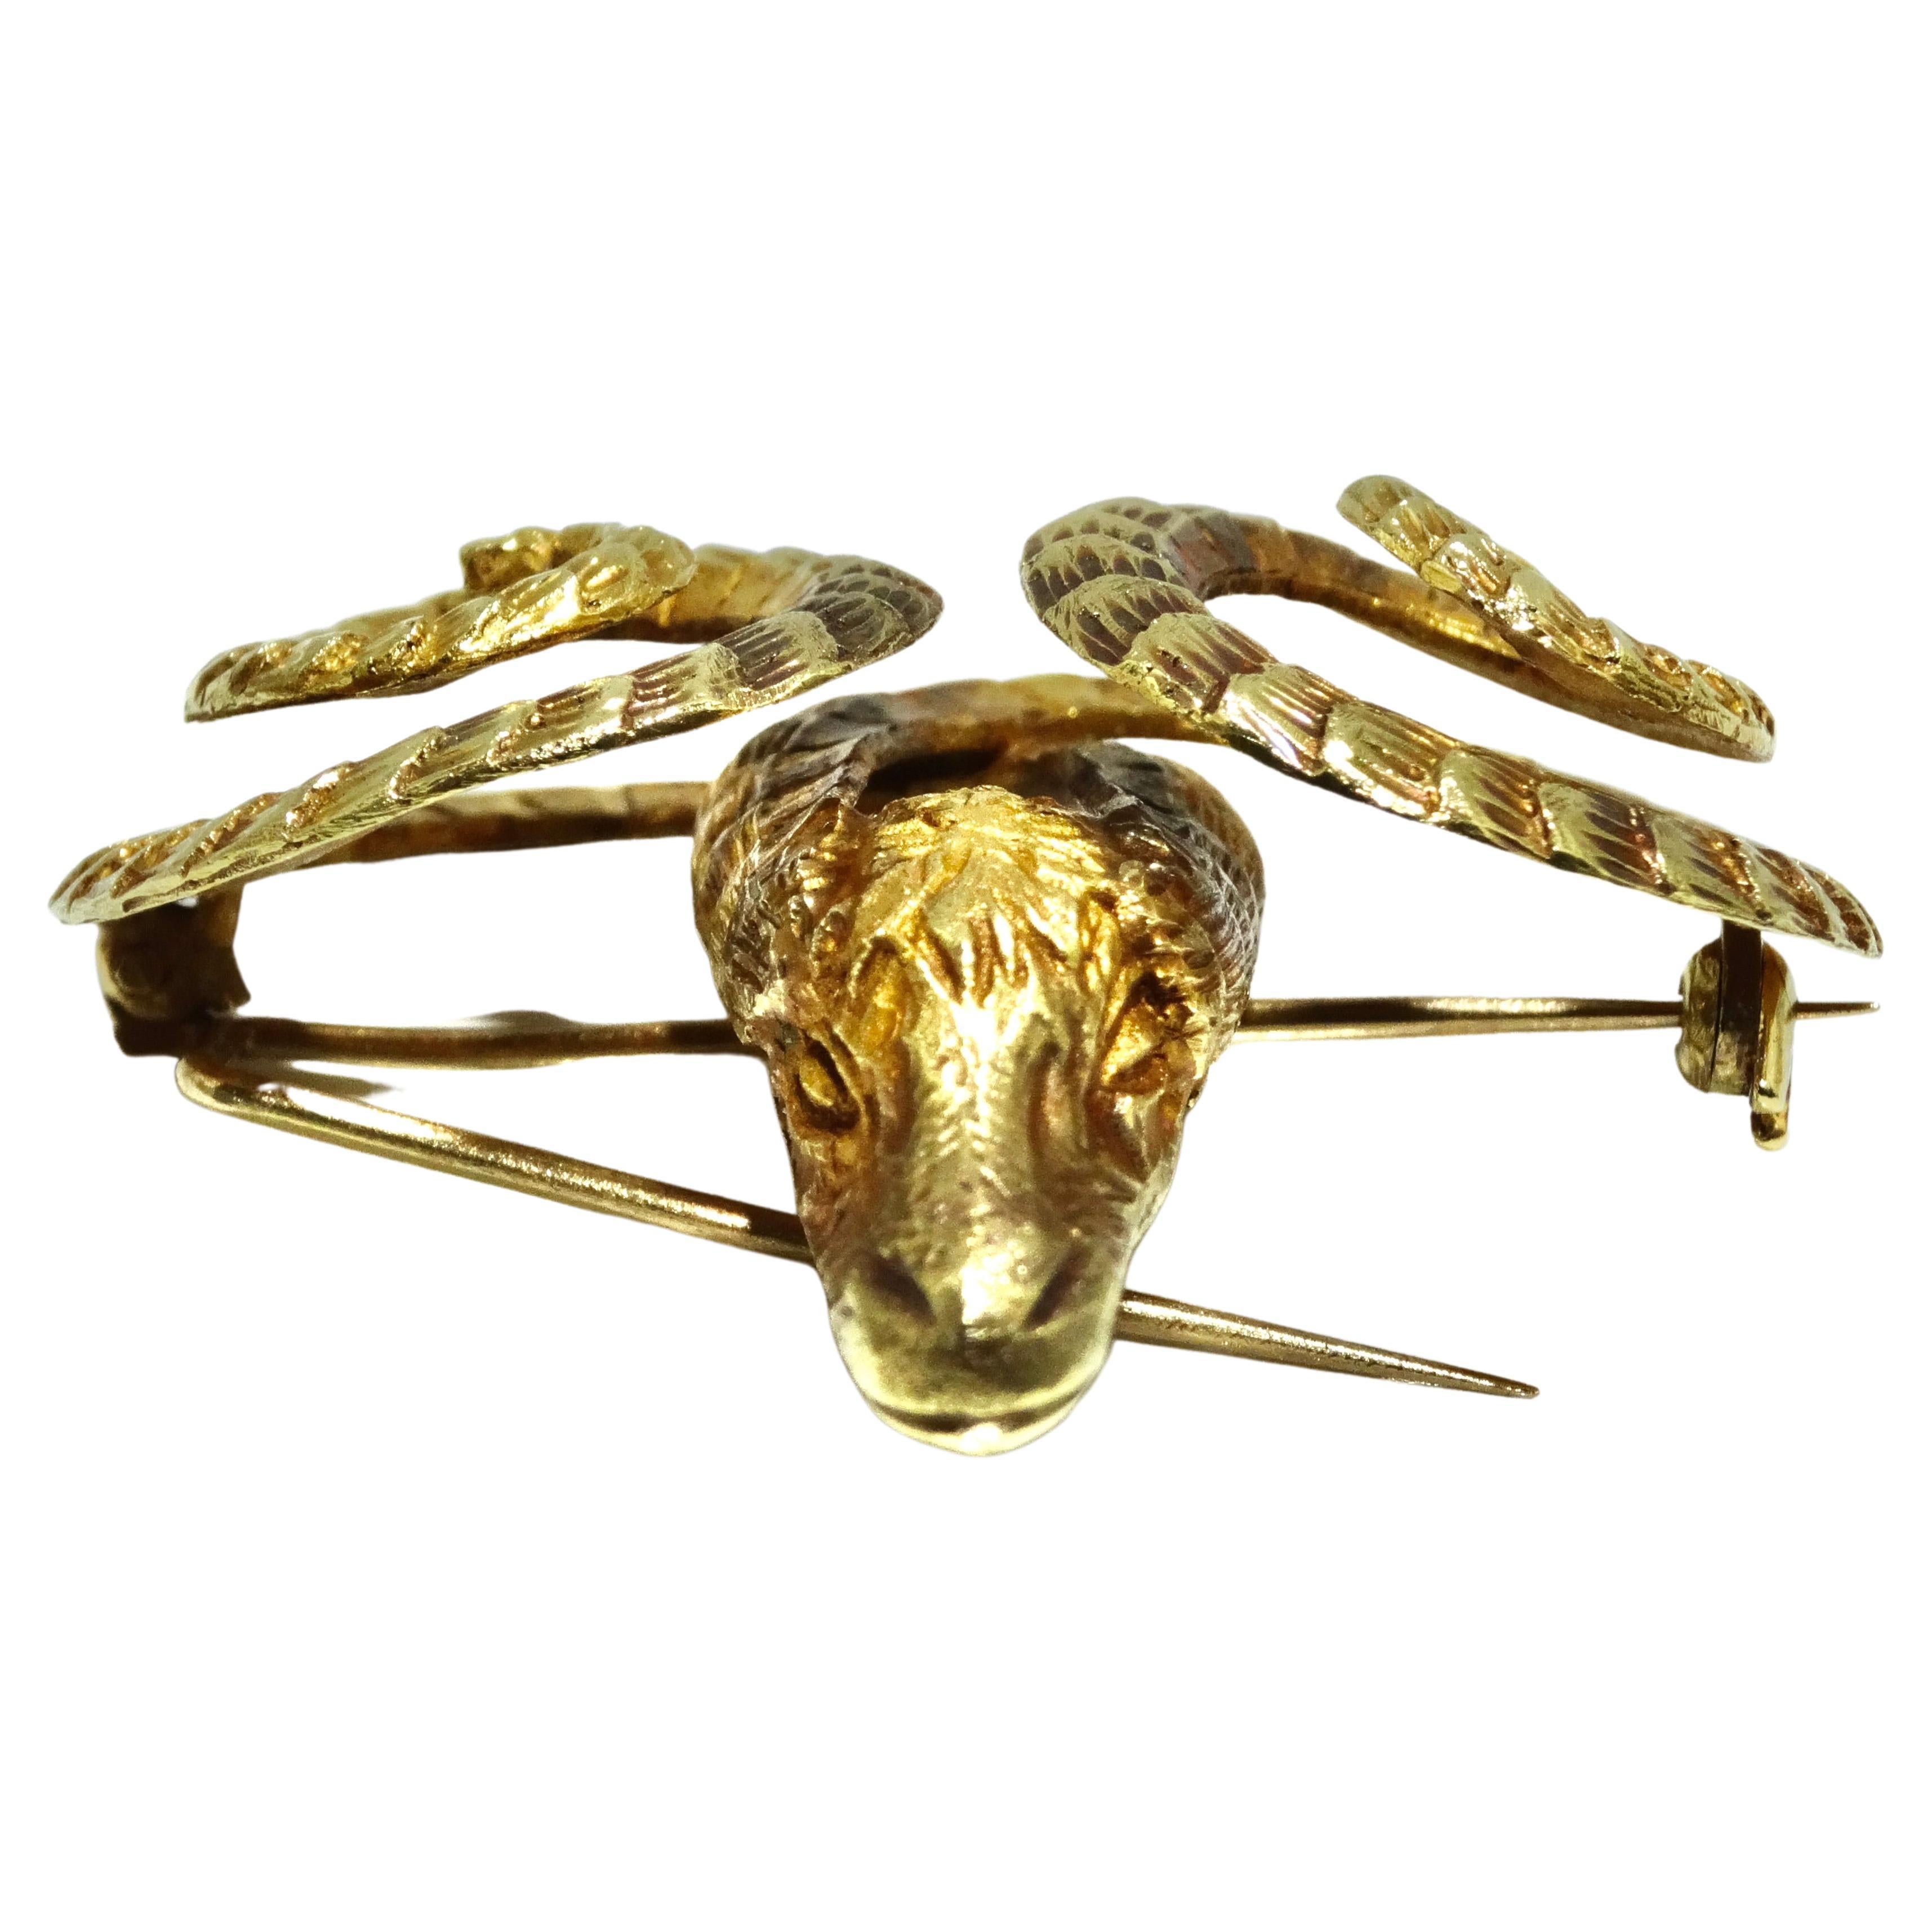 Ilias Lalaounis 18k gold ram's head brooch circa 1980s, Finely detailed with gold chasing and texturing 18k gold. Style beautiful with your Dior or Chanel Jacket or Blazer. 
Note: Double pinstem, one catch. 

Size 2 x 1-3/4 inches
Weight 31.46 grams